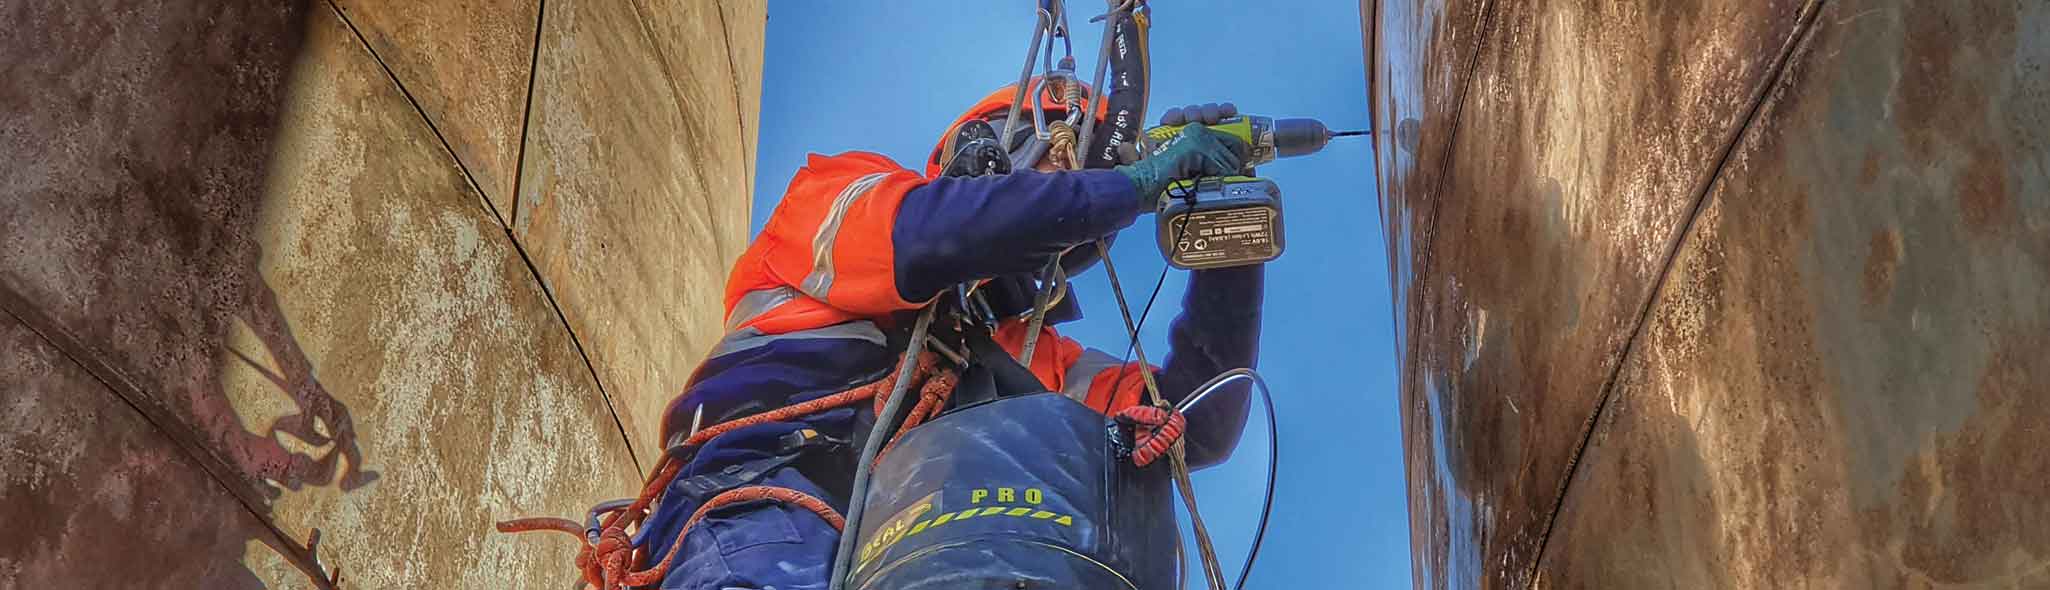 Highpoint Solutions - Industrial Rope Access Inspection and Maintenance